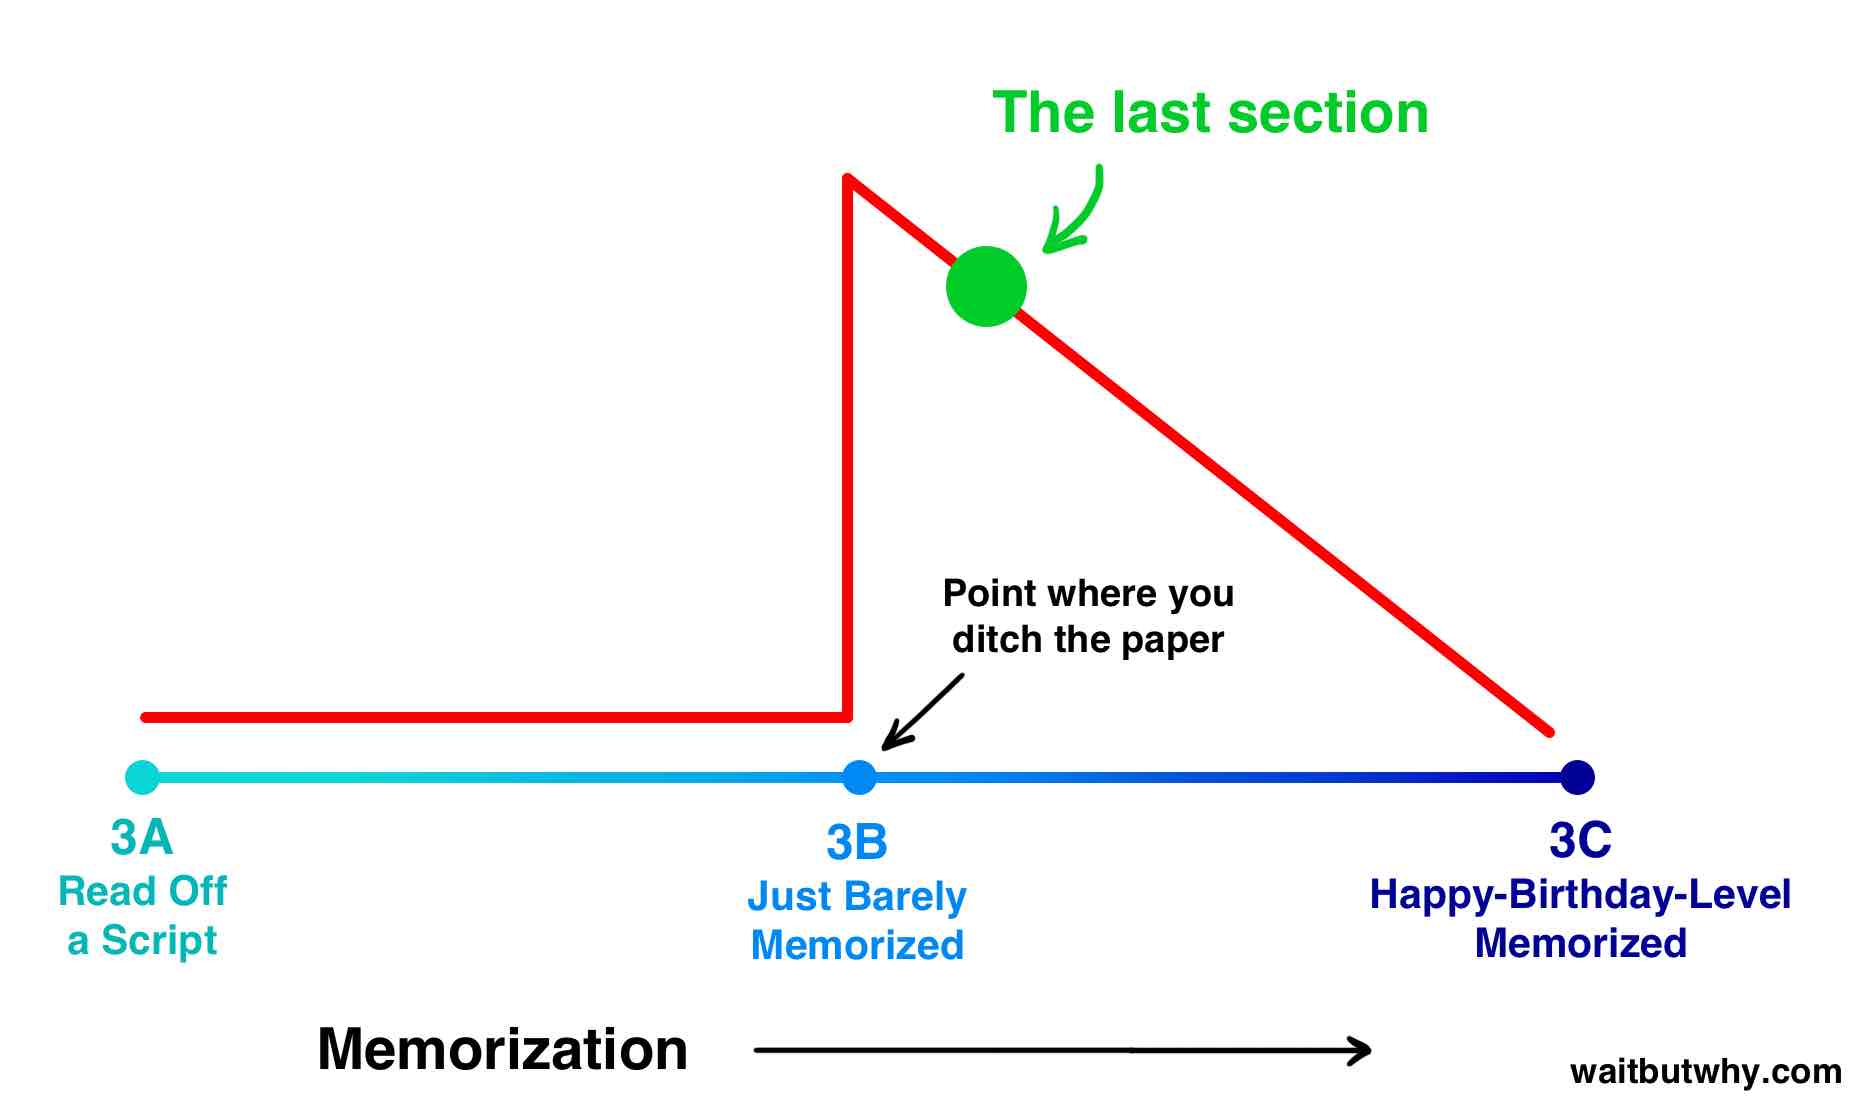 memorization spectrum with the last section just past just barely memorized